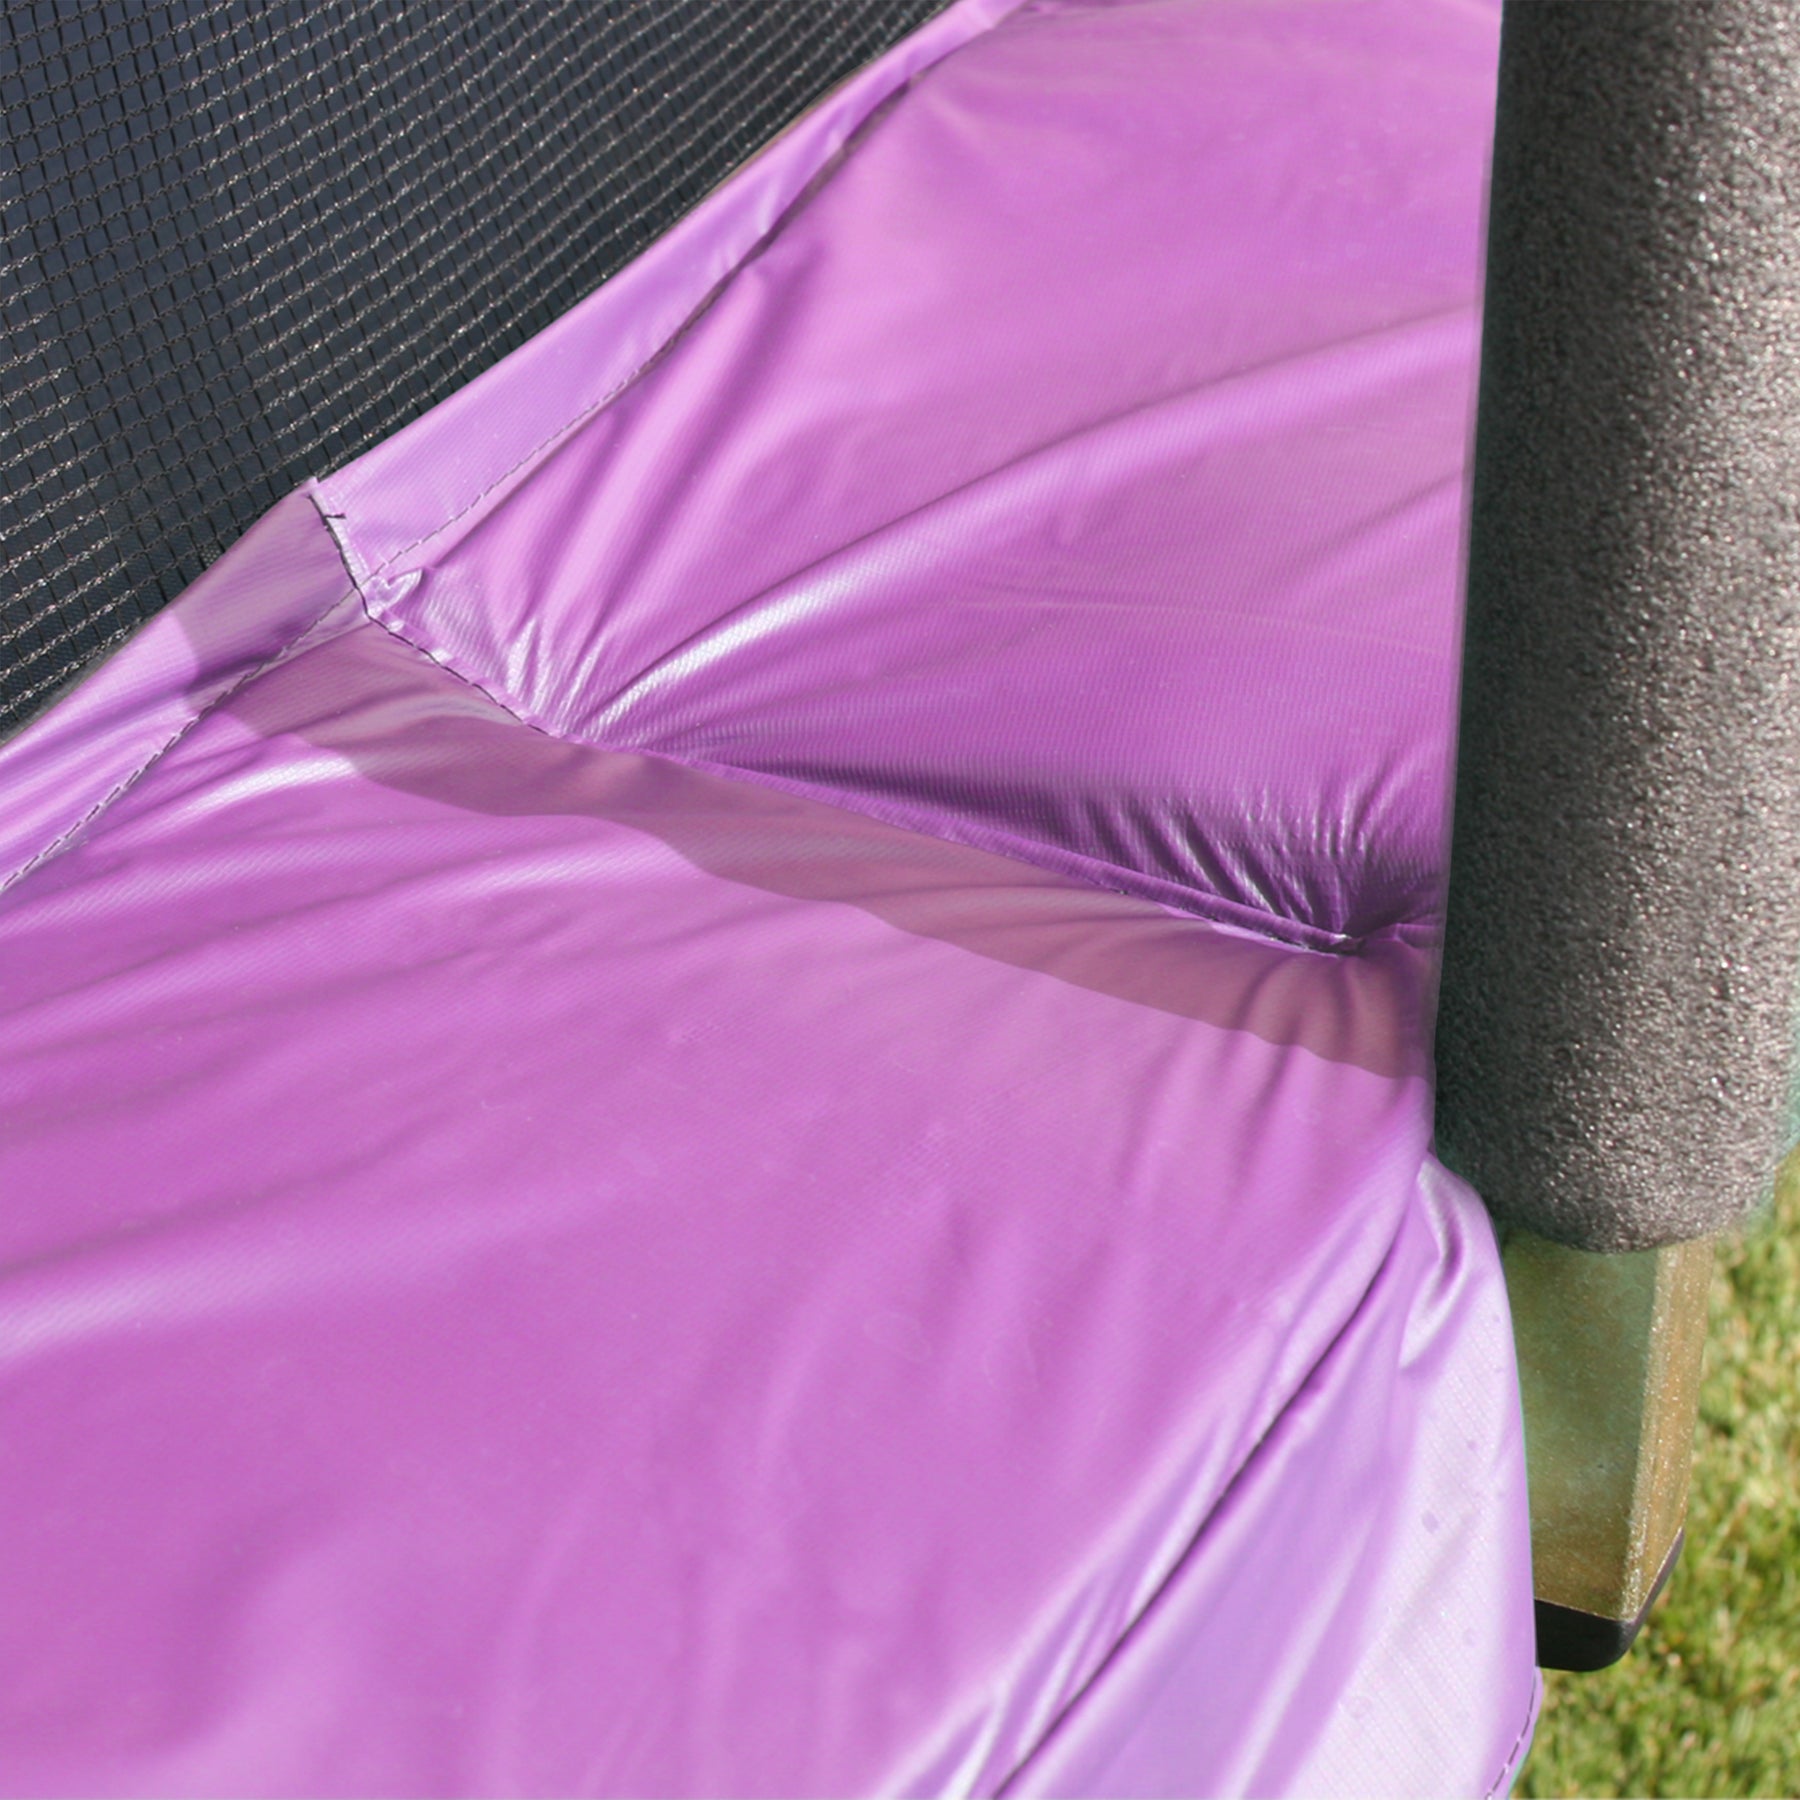 SkyBound 15ft Trampoline Spring Cover Pad fits up to 8 Springs - Pink -  15 - Bed Bath & Beyond - 32869504